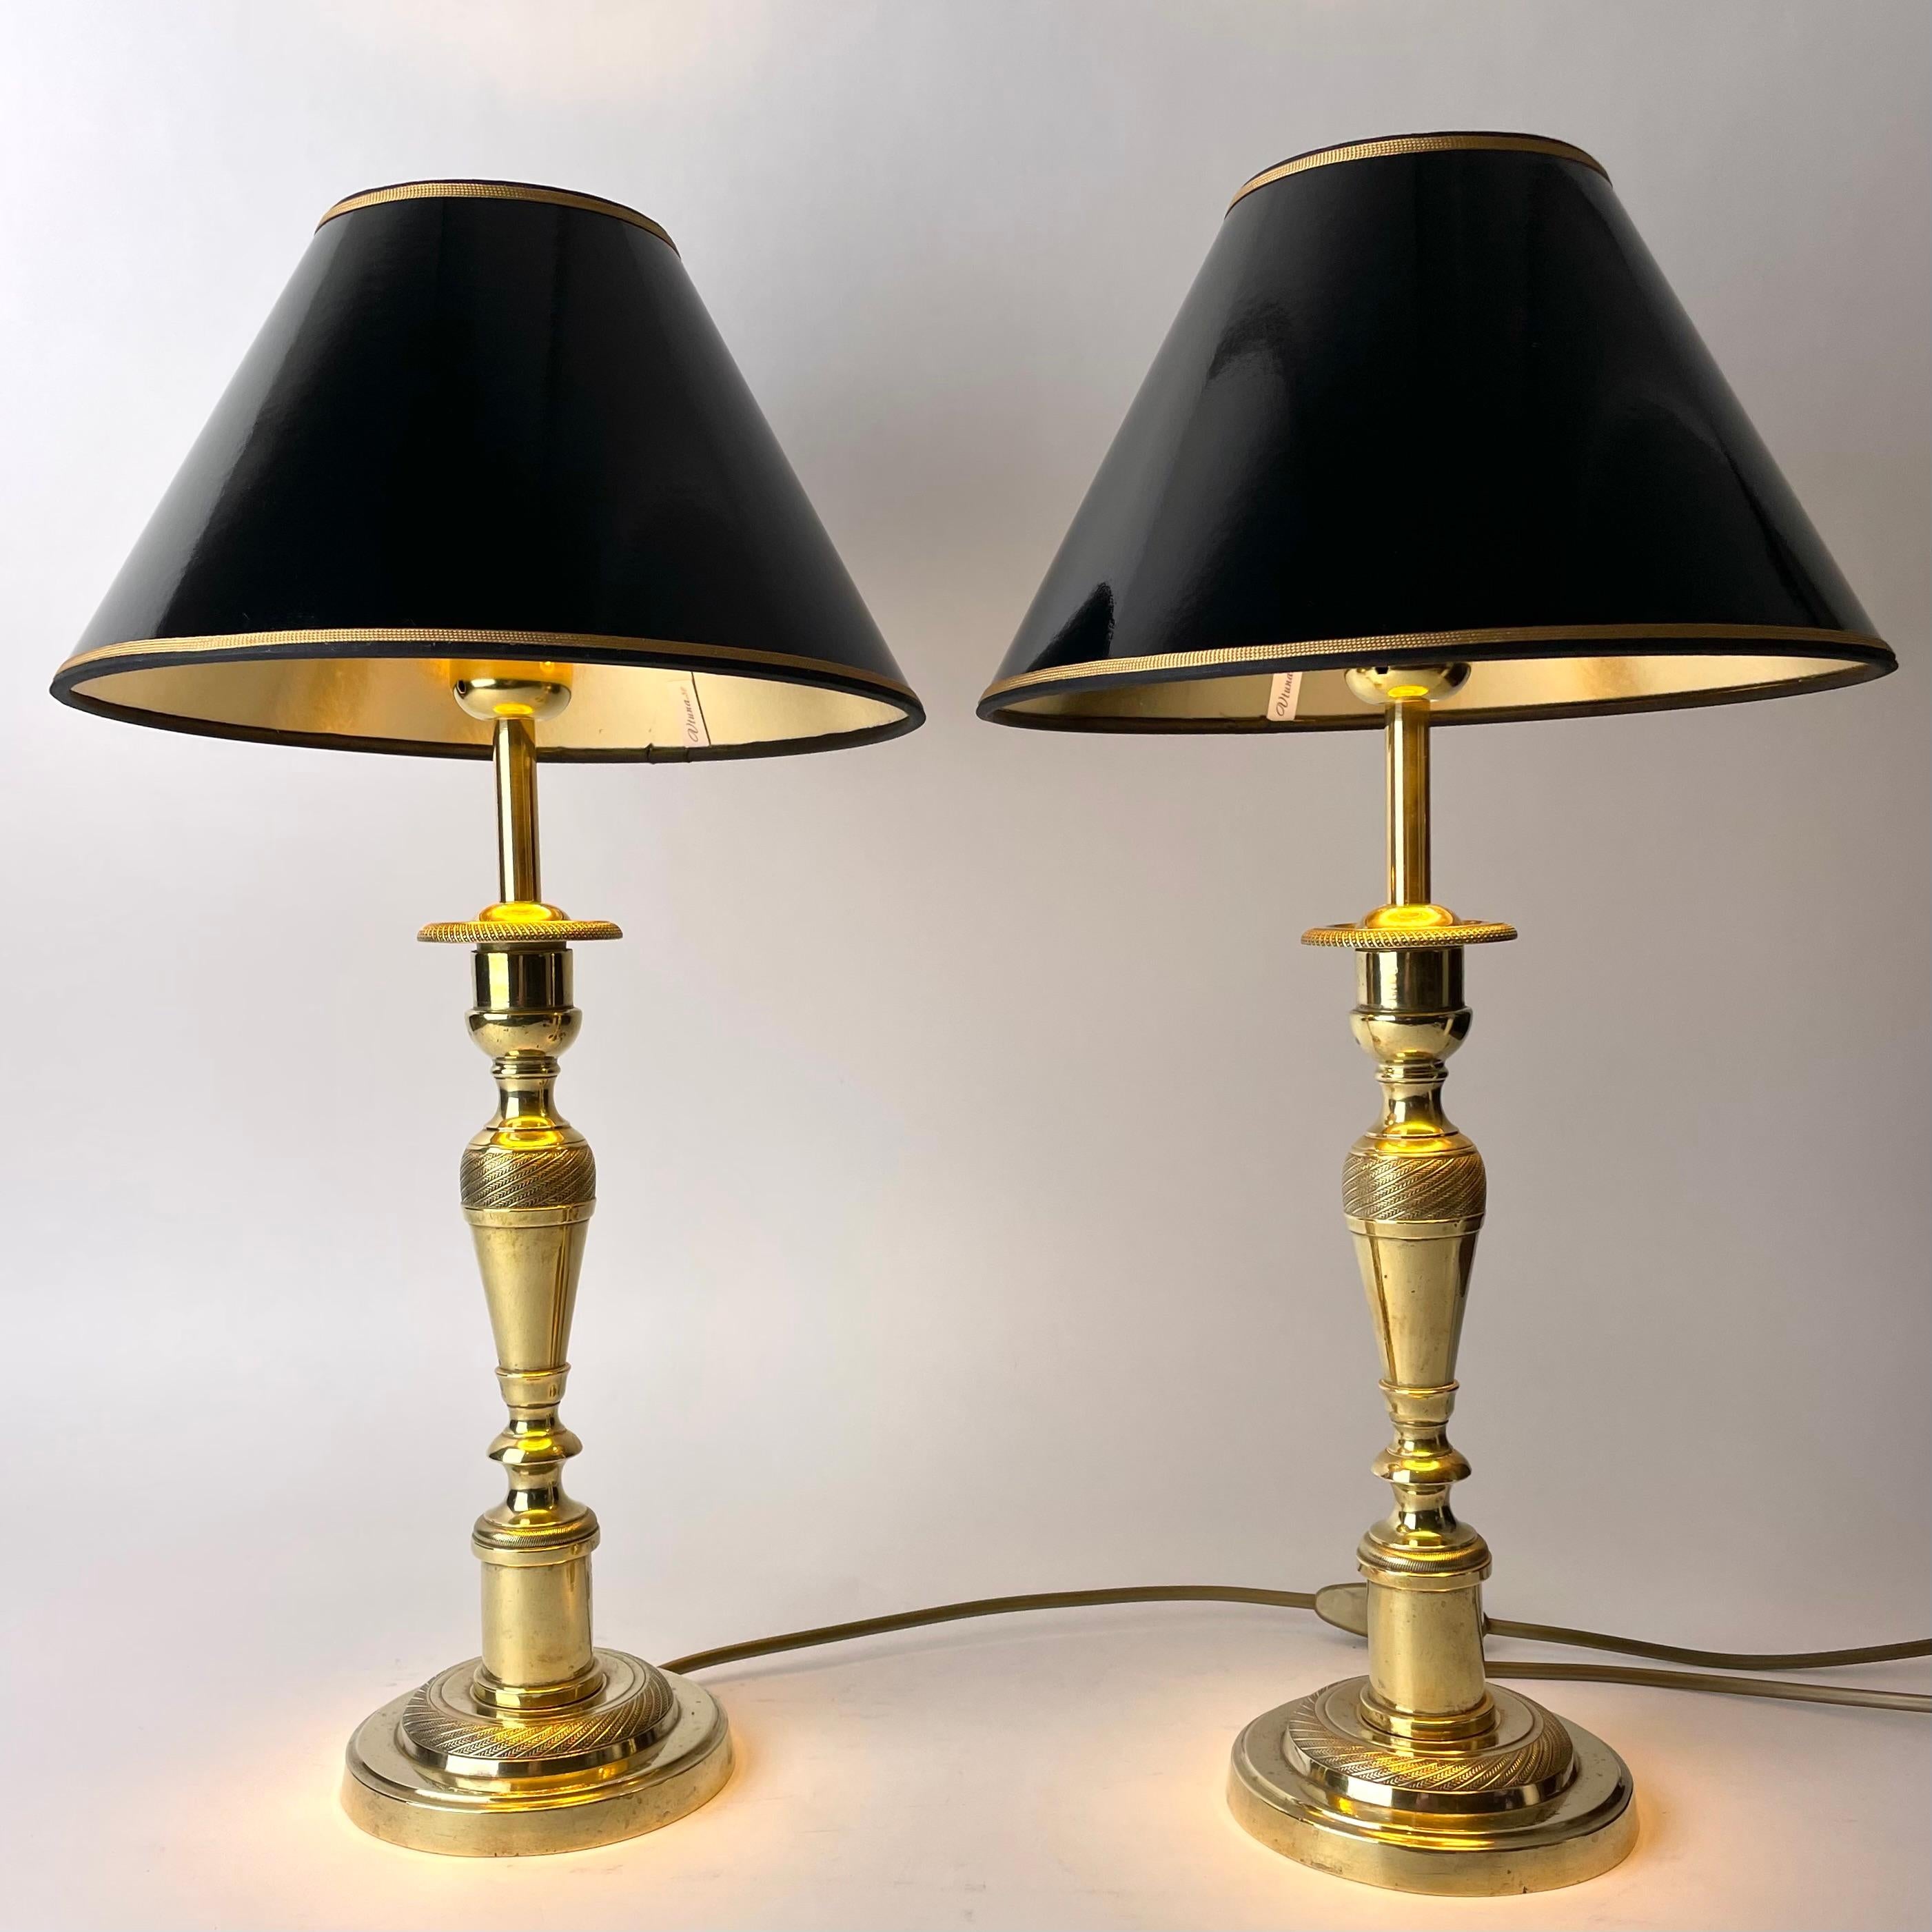 Beautiful pair of Empire Brass Table Lamps originally candlesticks from the 1820s, converted to table lamps in the early 20th Century. 

Newly, rewired electricity.

New lampshades in black lacquer with gilding on the inside to give a cozy